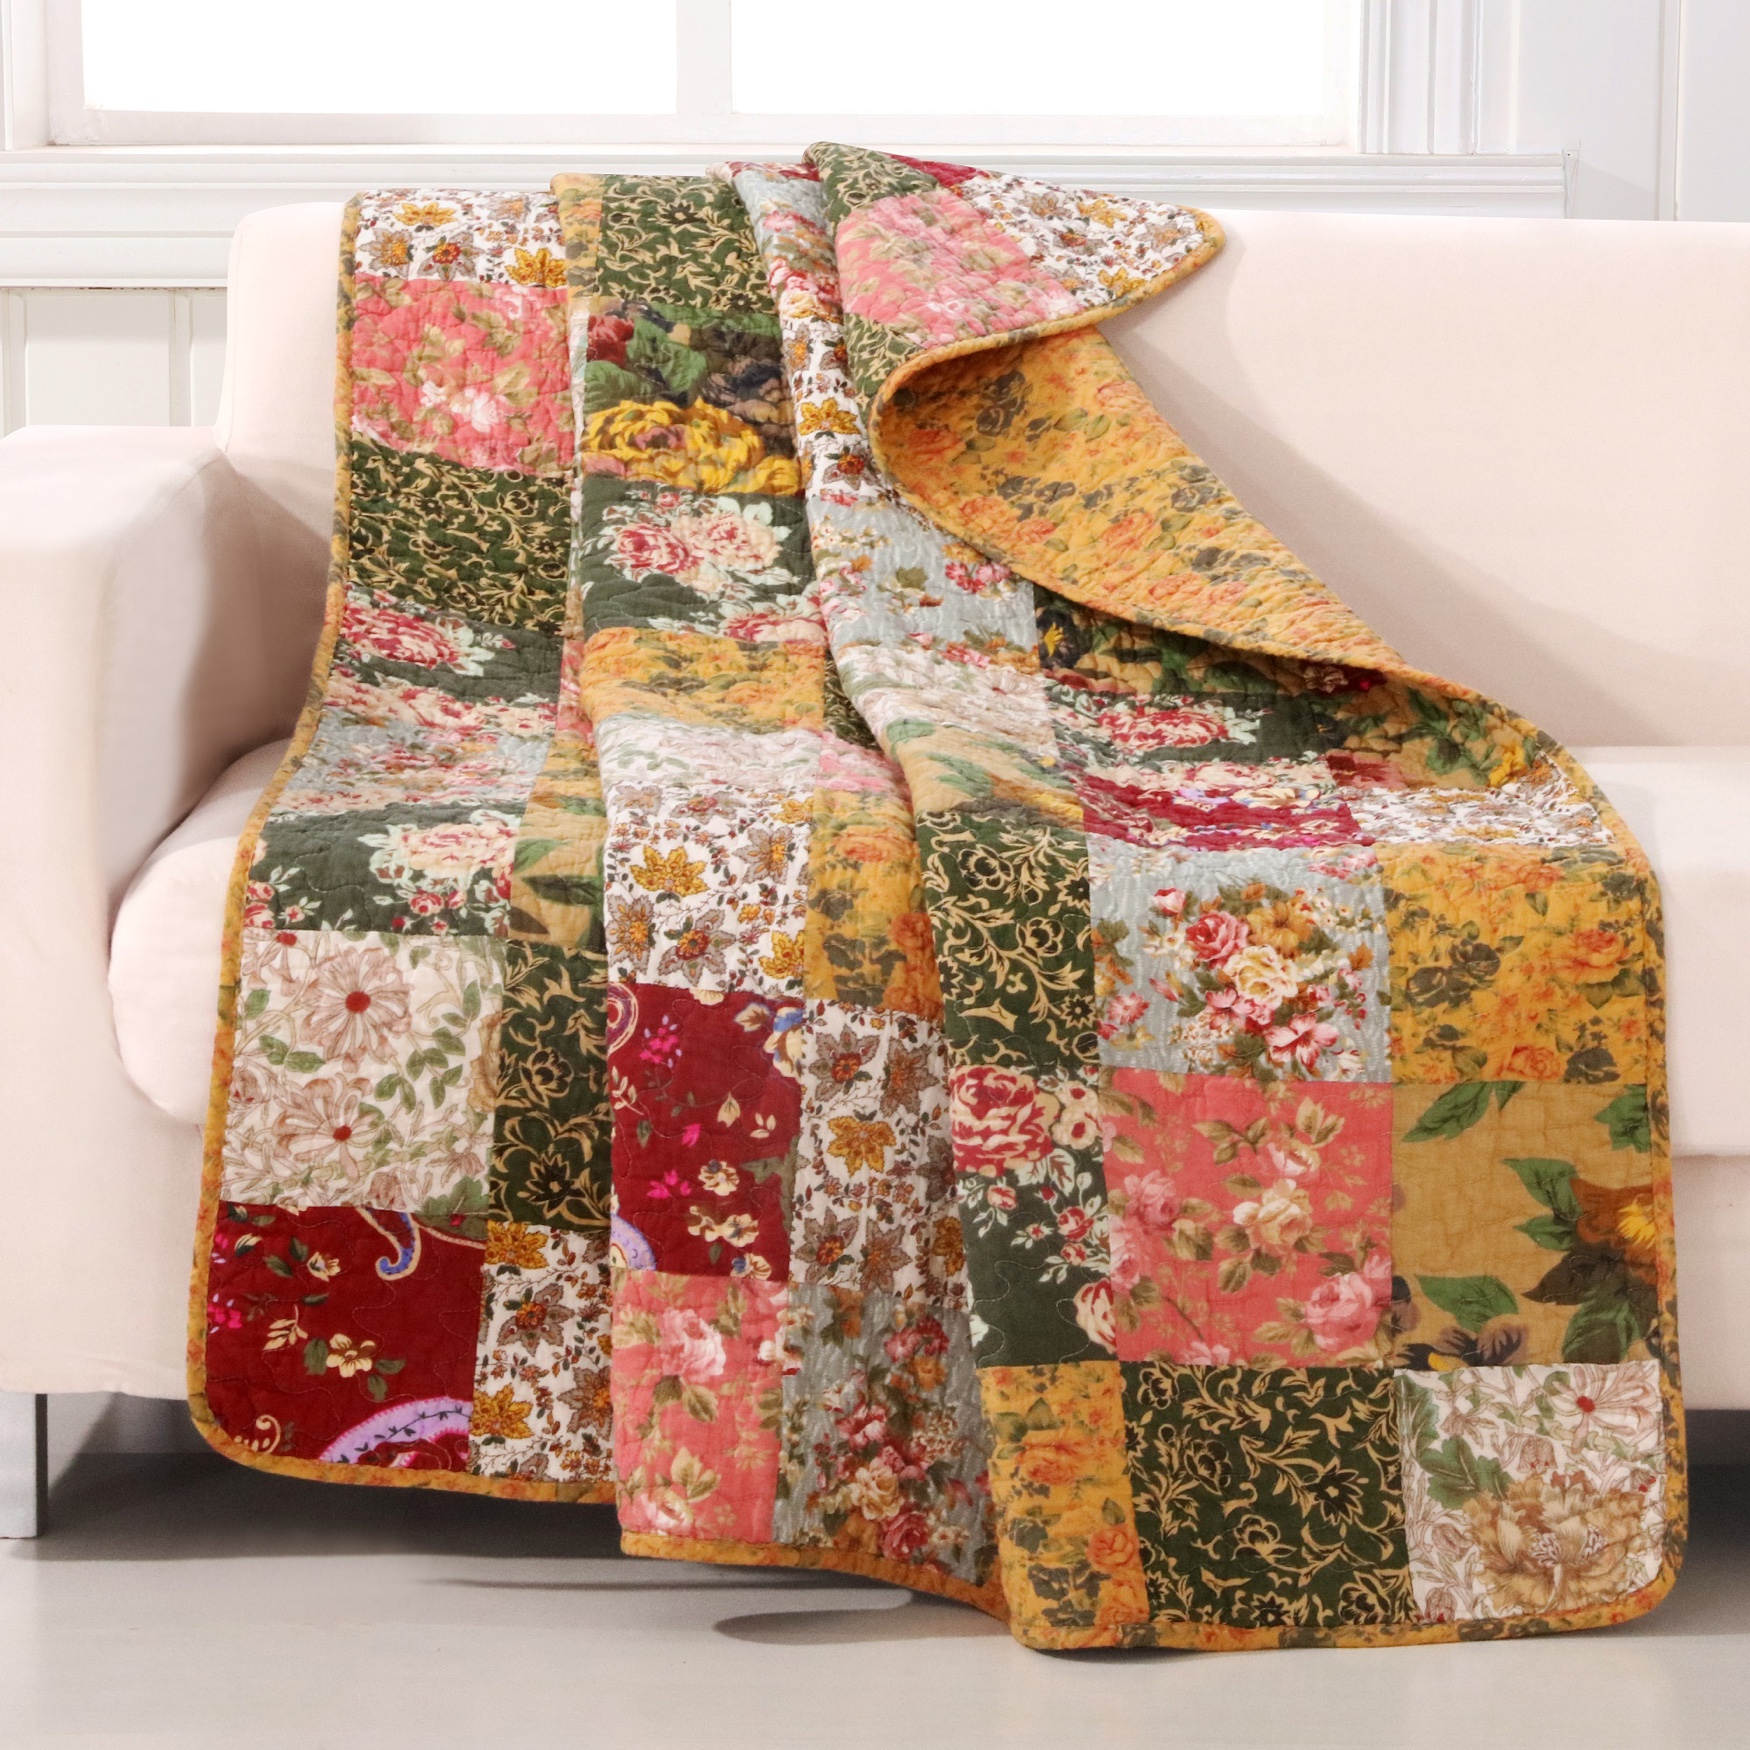 Antique Chic Quilted Patchwork Throw Blanket, MULTI